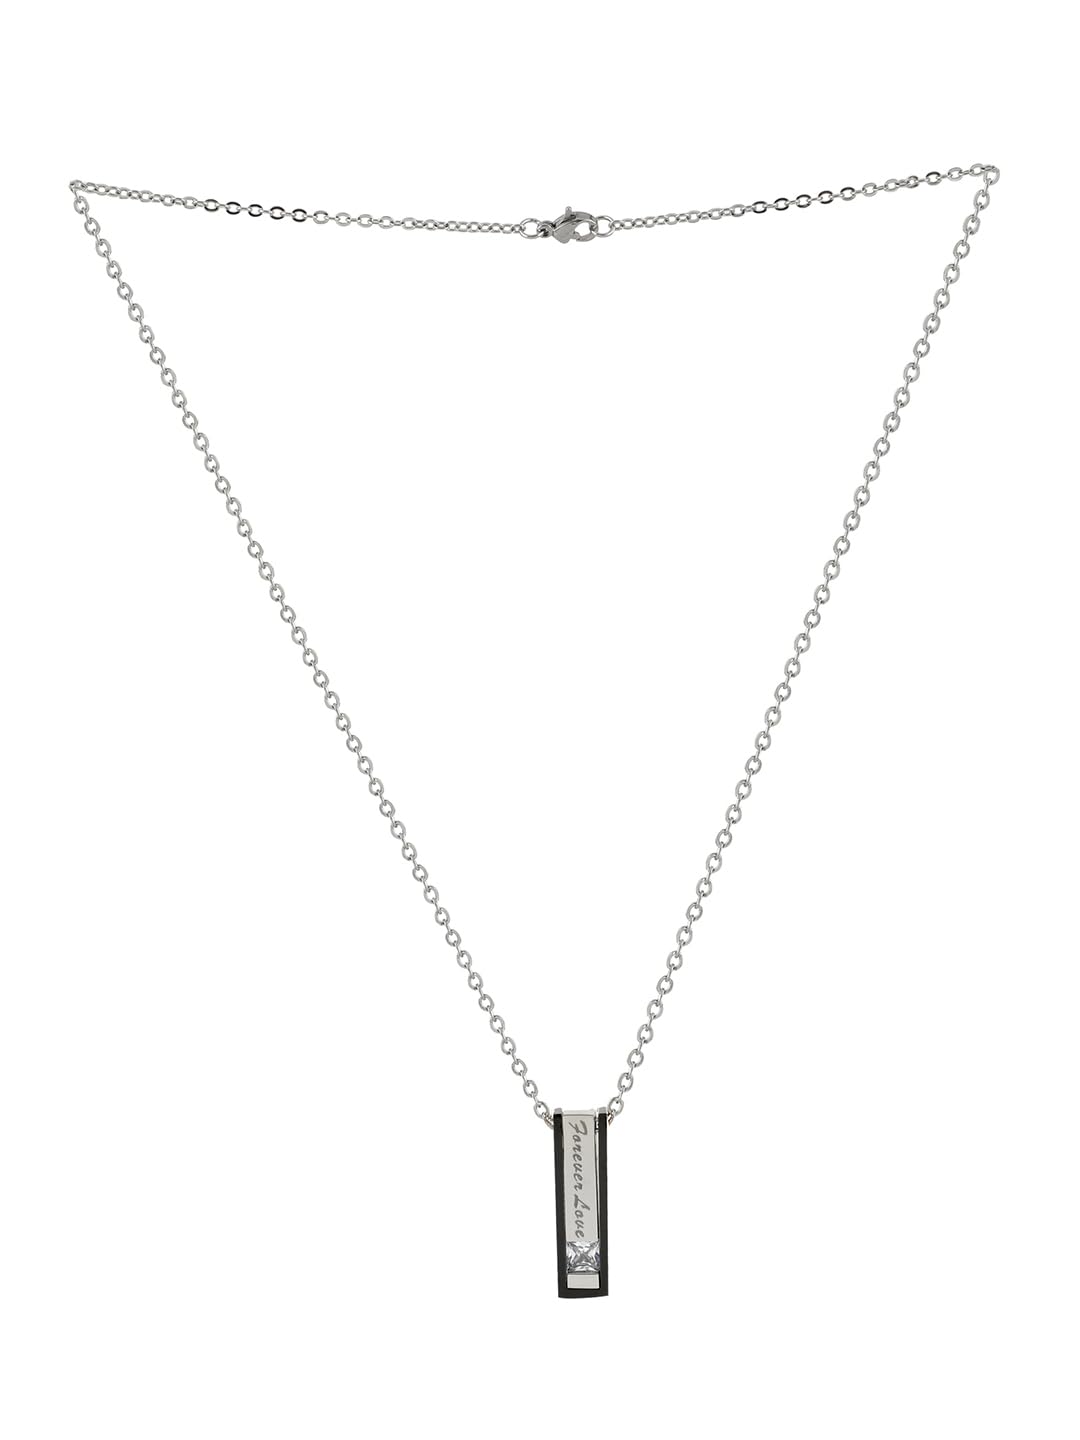 Stainless Steel CZ Black Pendant Necklace | Love Forever Stainless Steel CZ Black Pendant Chain